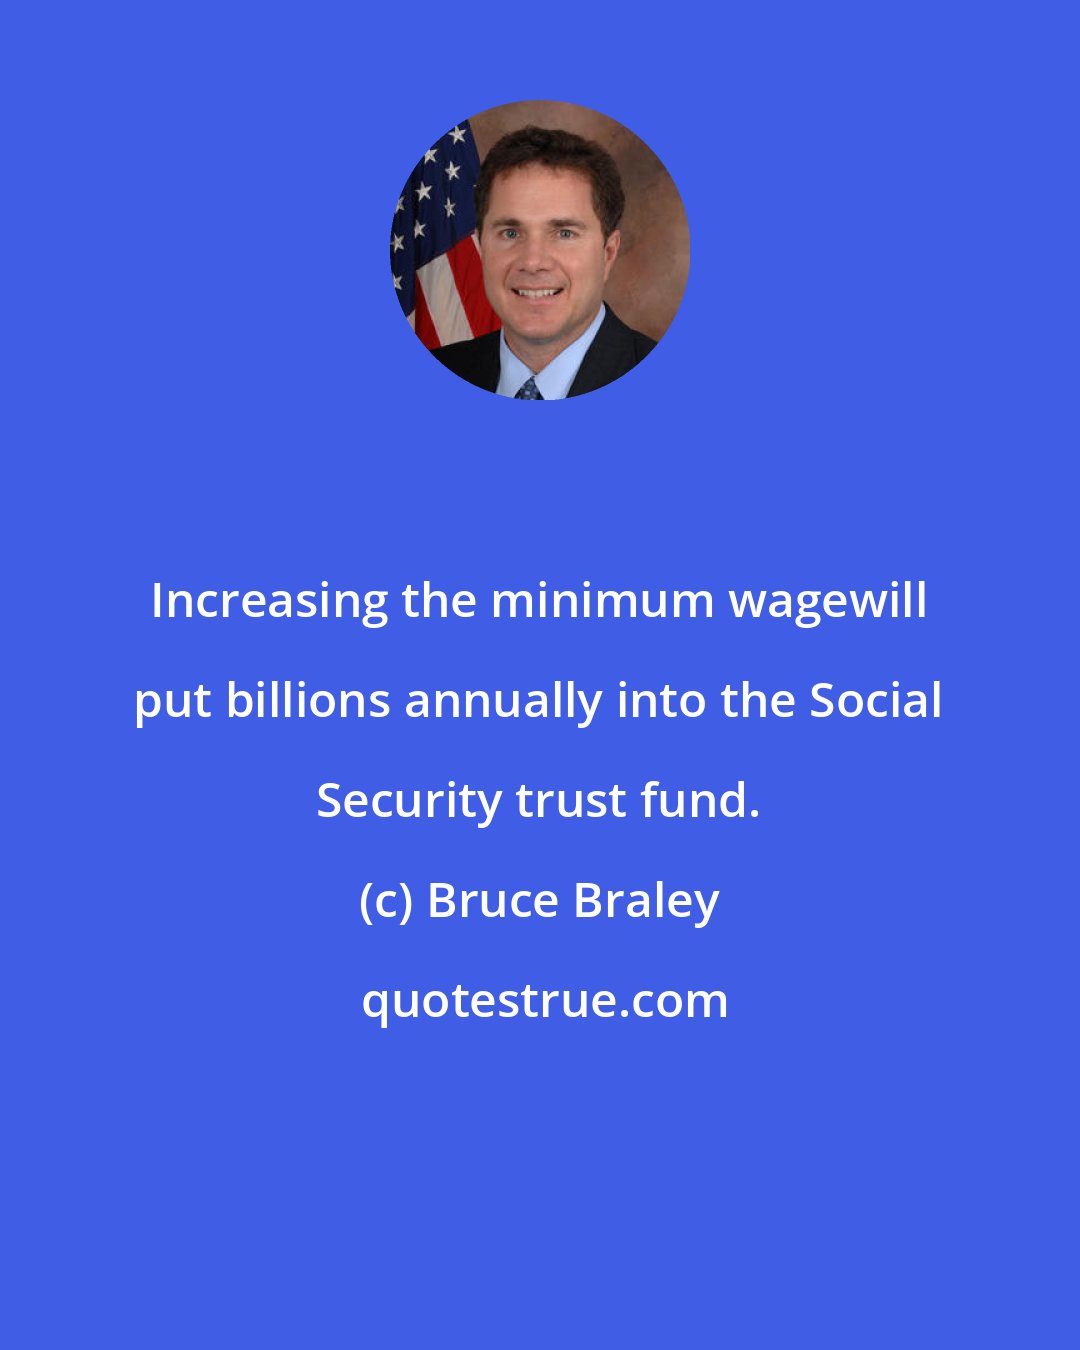 Bruce Braley: Increasing the minimum wagewill put billions annually into the Social Security trust fund.